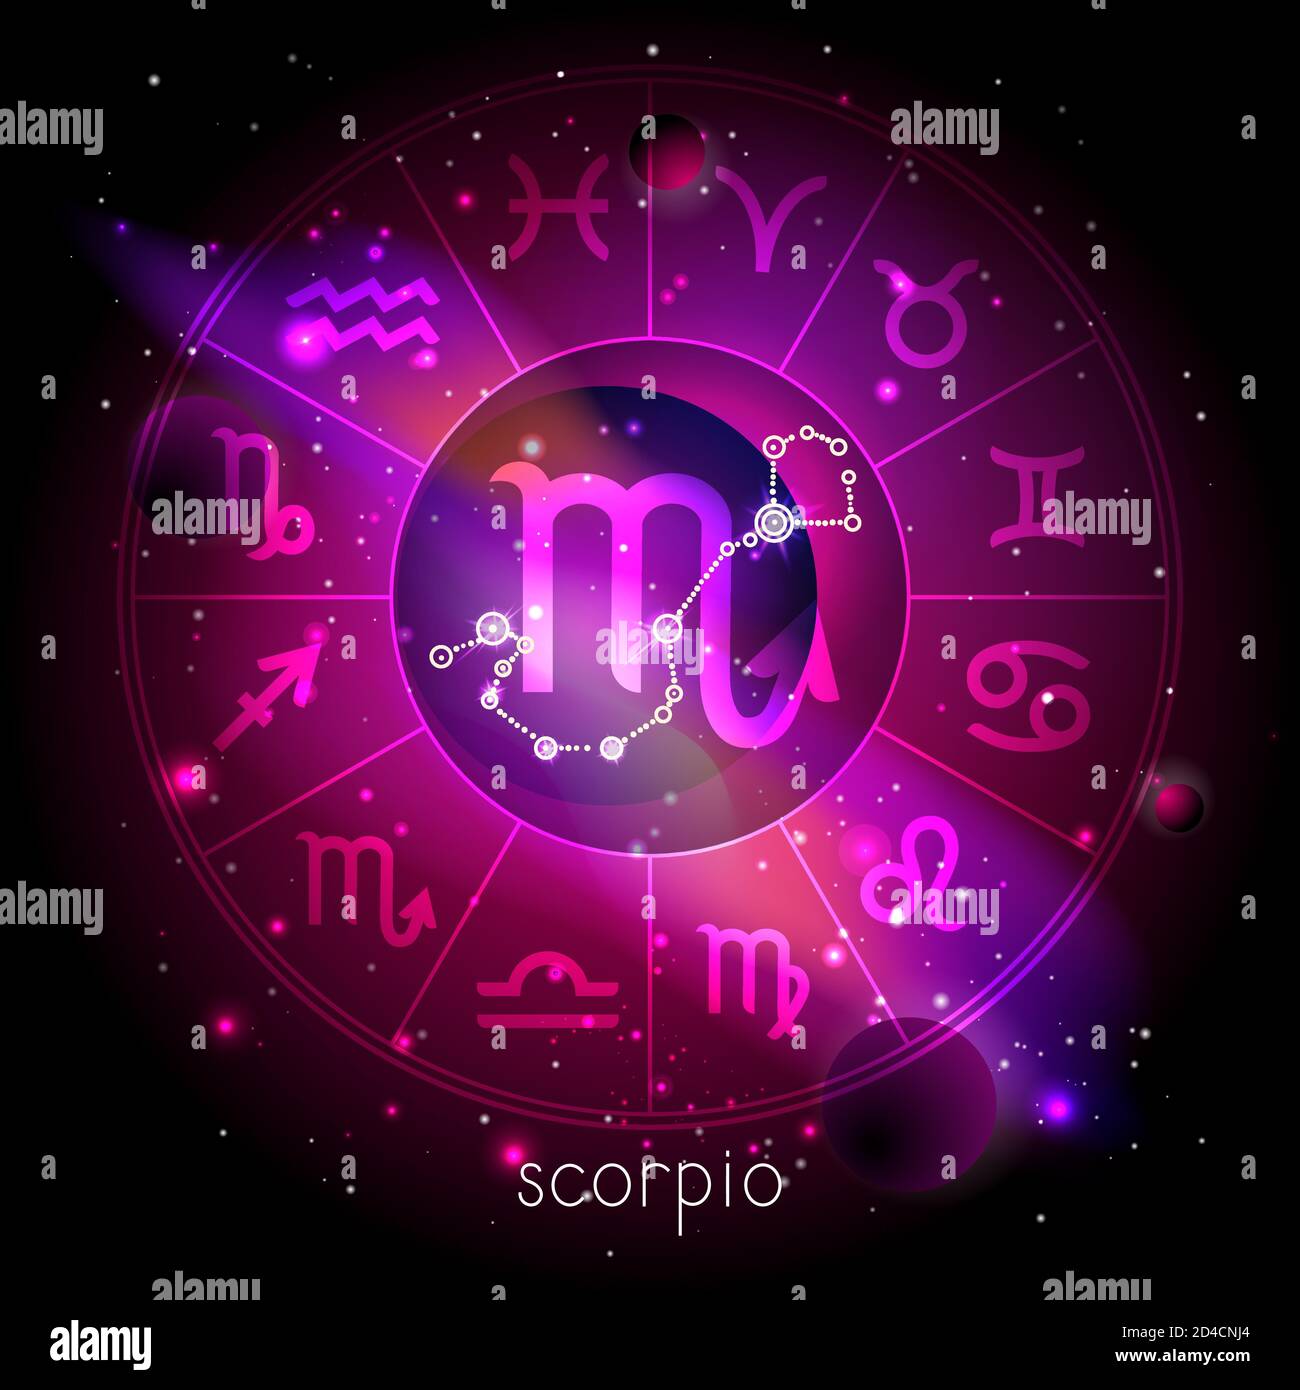 Vector illustration of sign and constellation SCORPIO with Horoscope circle against the space background with planets and stars. Sacred symbols in red Stock Vector